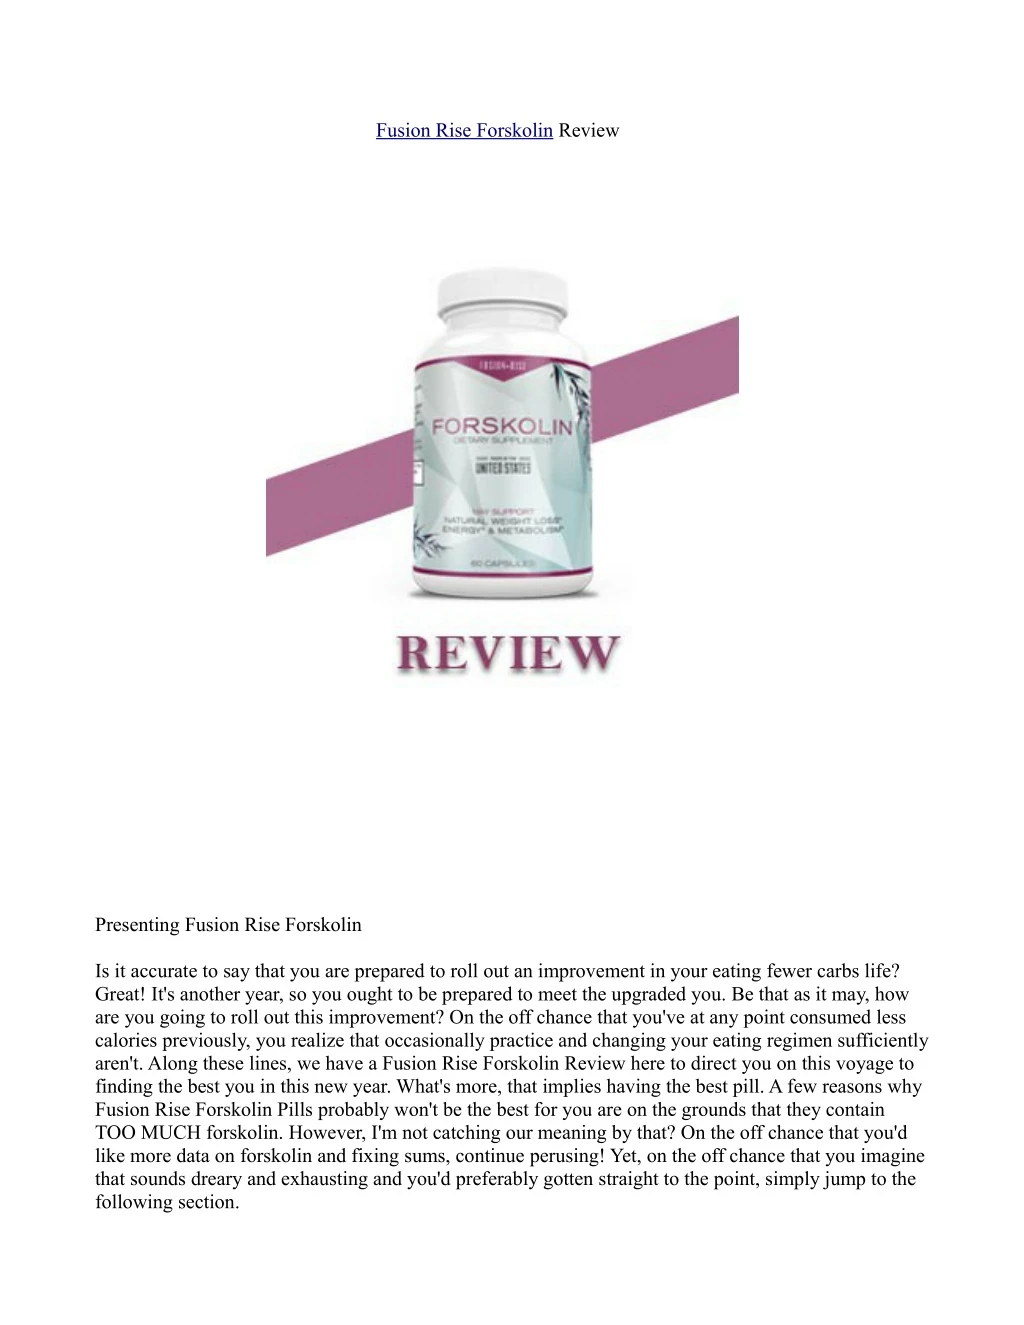 fusion rise forskolin review